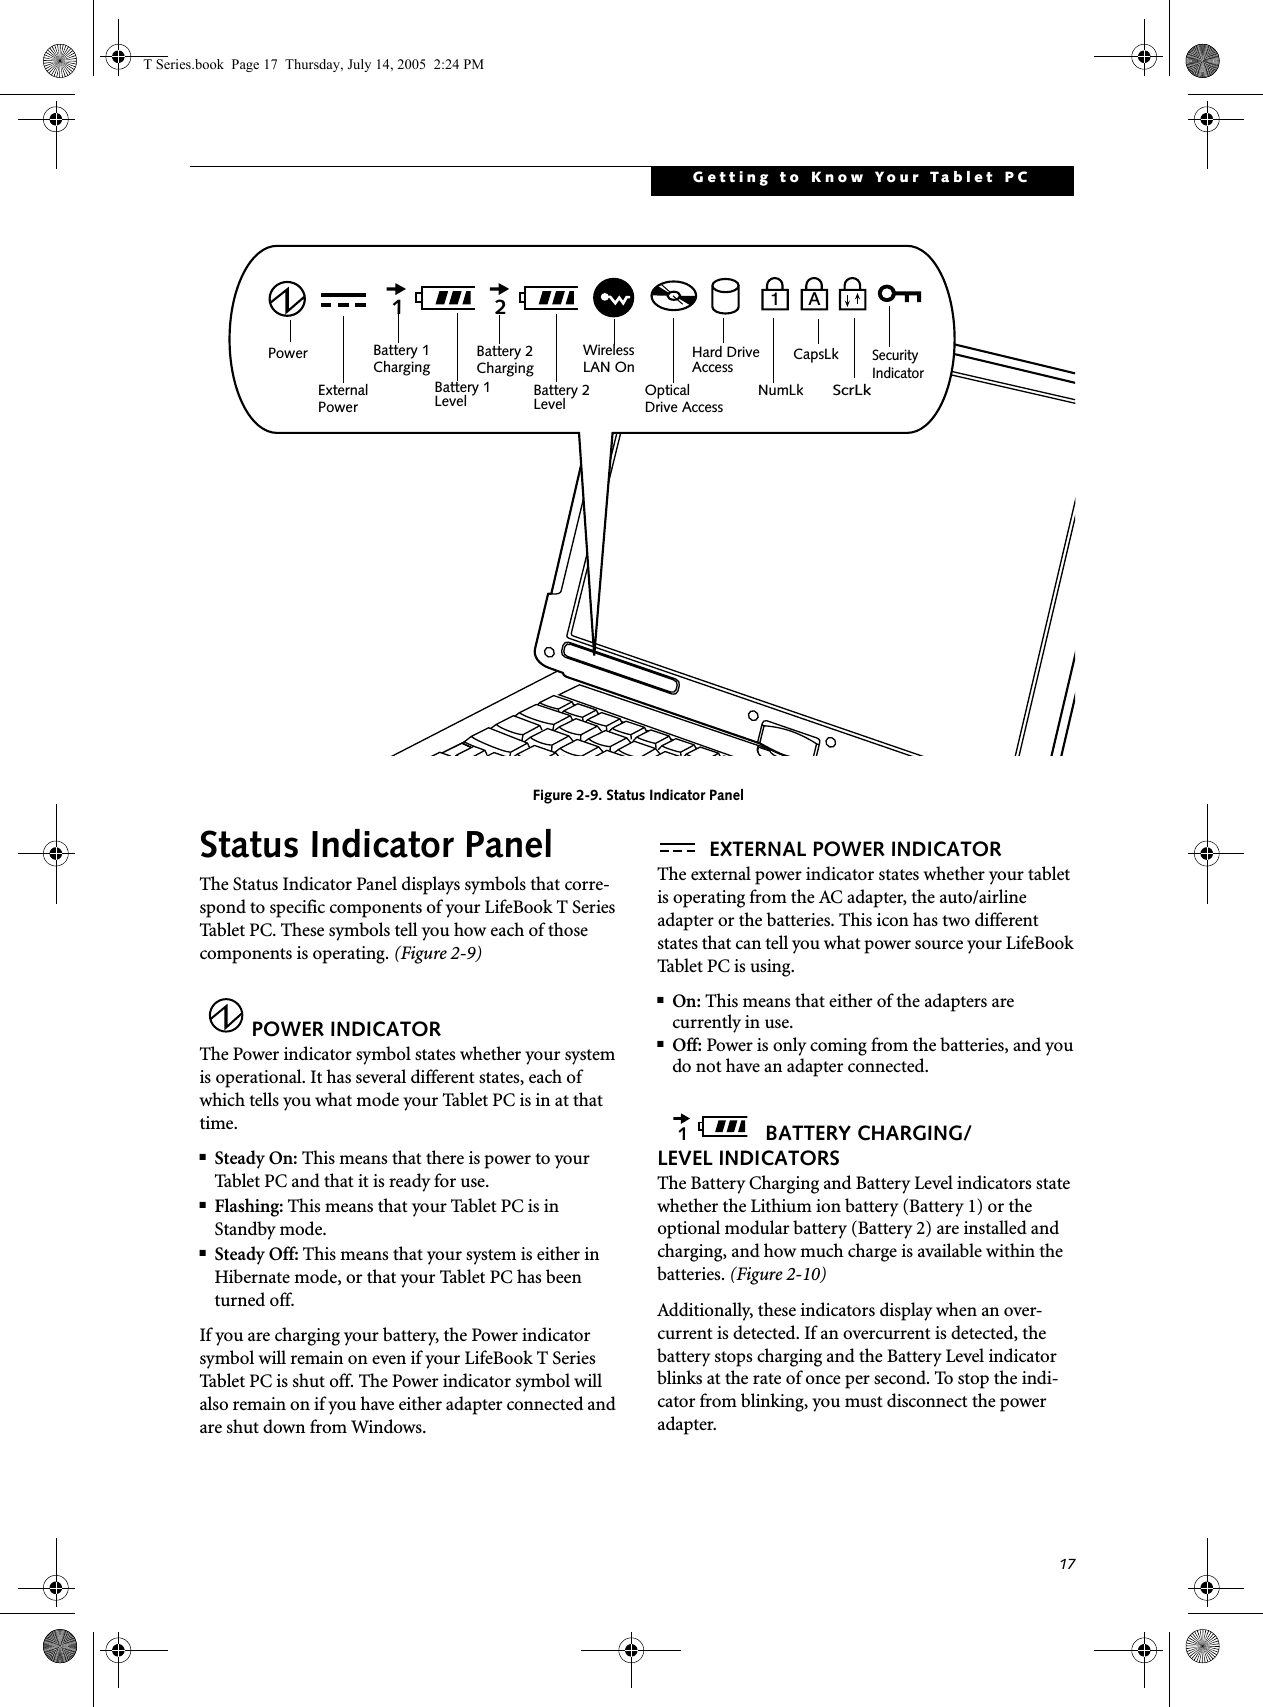 17Getting to Know Your Tablet PCFigure 2-9. Status Indicator PanelStatus Indicator PanelThe Status Indicator Panel displays symbols that corre-spond to specific components of your LifeBook T Series Tablet PC. These symbols tell you how each of those components is operating. (Figure 2-9)POWER INDICATORThe Power indicator symbol states whether your system is operational. It has several different states, each of which tells you what mode your Tablet PC is in at that time.■Steady On: This means that there is power to your Tablet PC and that it is ready for use.■Flashing: This means that your Tablet PC is in Standby mode.■Steady Off: This means that your system is either in Hibernate mode, or that your Tablet PC has been turned off.If you are charging your battery, the Power indicator symbol will remain on even if your LifeBook T Series Tablet PC is shut off. The Power indicator symbol will also remain on if you have either adapter connected and are shut down from Windows.EXTERNAL POWER INDICATORThe external power indicator states whether your tablet is operating from the AC adapter, the auto/airline adapter or the batteries. This icon has two different states that can tell you what power source your LifeBook Tablet PC is using.■On: This means that either of the adapters are currently in use.■Off: Power is only coming from the batteries, and you do not have an adapter connected.BATTERY CHARGING/LEVEL INDICATORSThe Battery Charging and Battery Level indicators state whether the Lithium ion battery (Battery 1) or the optional modular battery (Battery 2) are installed and charging, and how much charge is available within the batteries. (Figure 2-10)Additionally, these indicators display when an over-current is detected. If an overcurrent is detected, the battery stops charging and the Battery Level indicator blinks at the rate of once per second. To stop the indi-cator from blinking, you must disconnect the power adapter.A112Battery 1LevelHard DriveAccessBattery 1NumLkScrLkCapsLkPowerExternalBattery 2Battery 2LevelWirelessLAN OnOpticalDrive AccessSecurityIndicatorPowerCharging Charging1T Series.book  Page 17  Thursday, July 14, 2005  2:24 PM